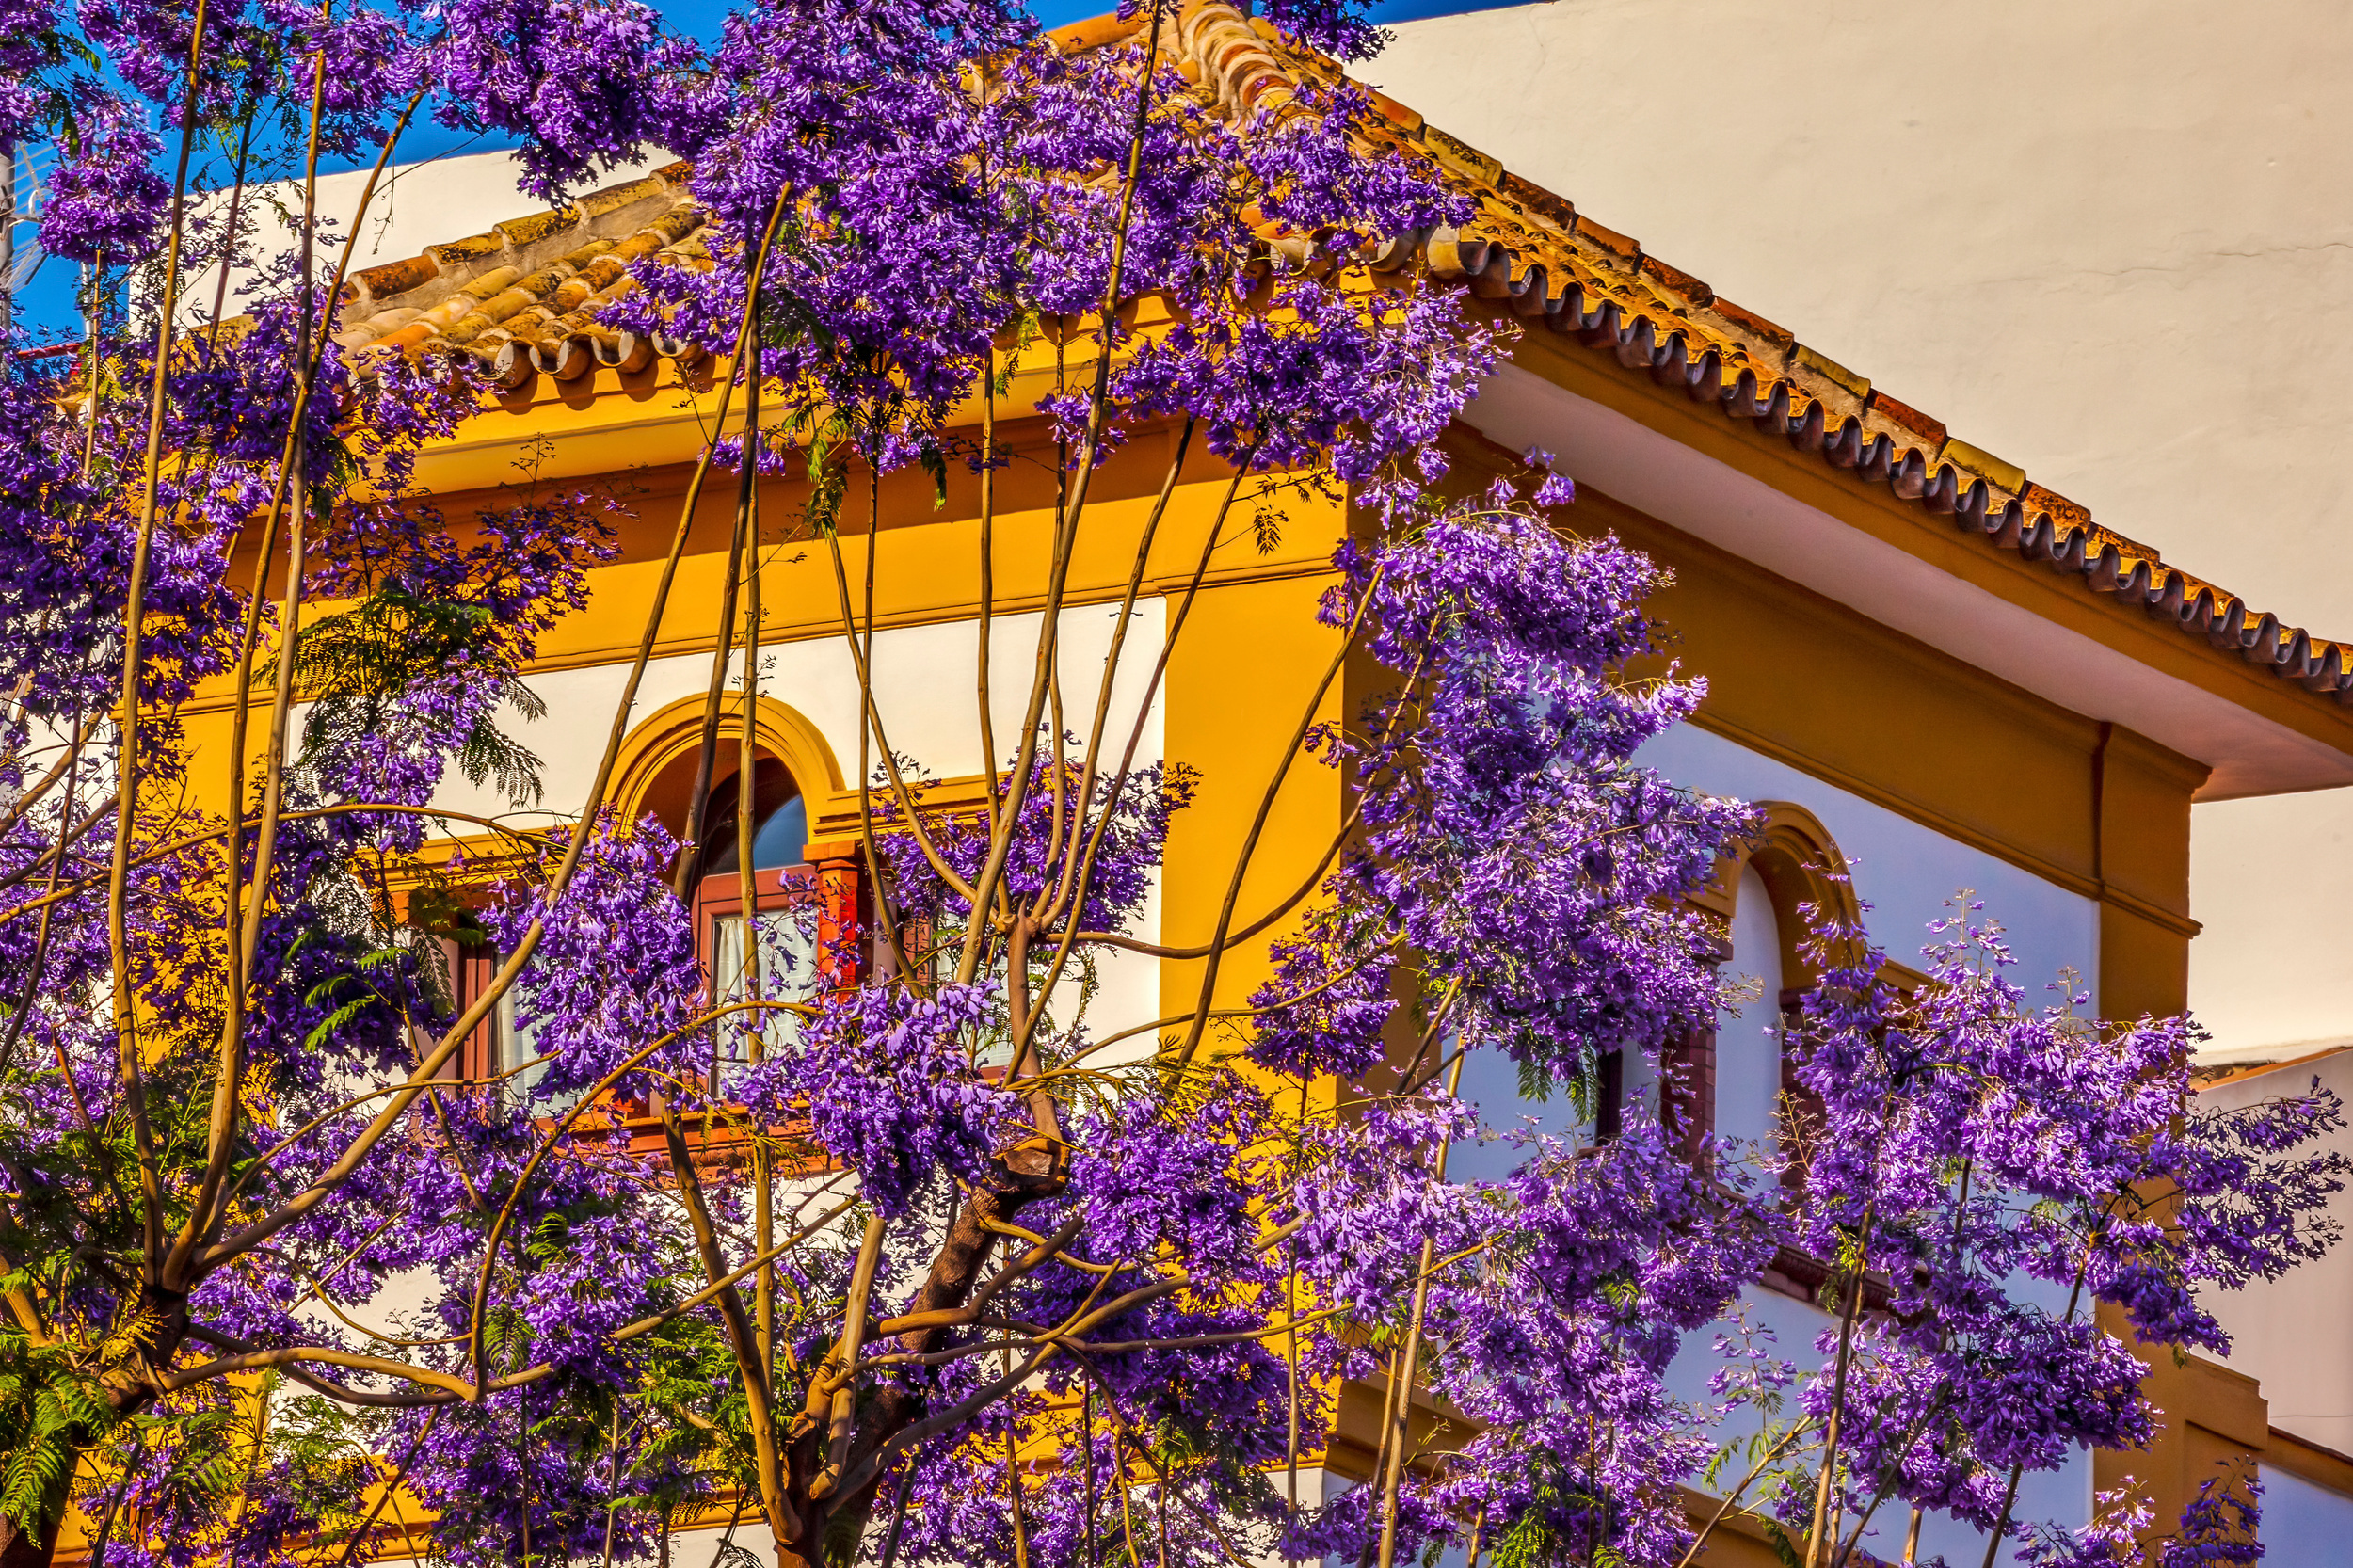 <p>Bright purple Jacaranda trees bloom all over Seville from March to May. Not only that, but the numerous orange trees that dot the city also flower in the spring.</p><p>You may also like: <a href='https://www.yardbarker.com/lifestyle/articles/20_beautiful_european_mountain_towns/s1__40170023'>20 beautiful European mountain towns</a></p>